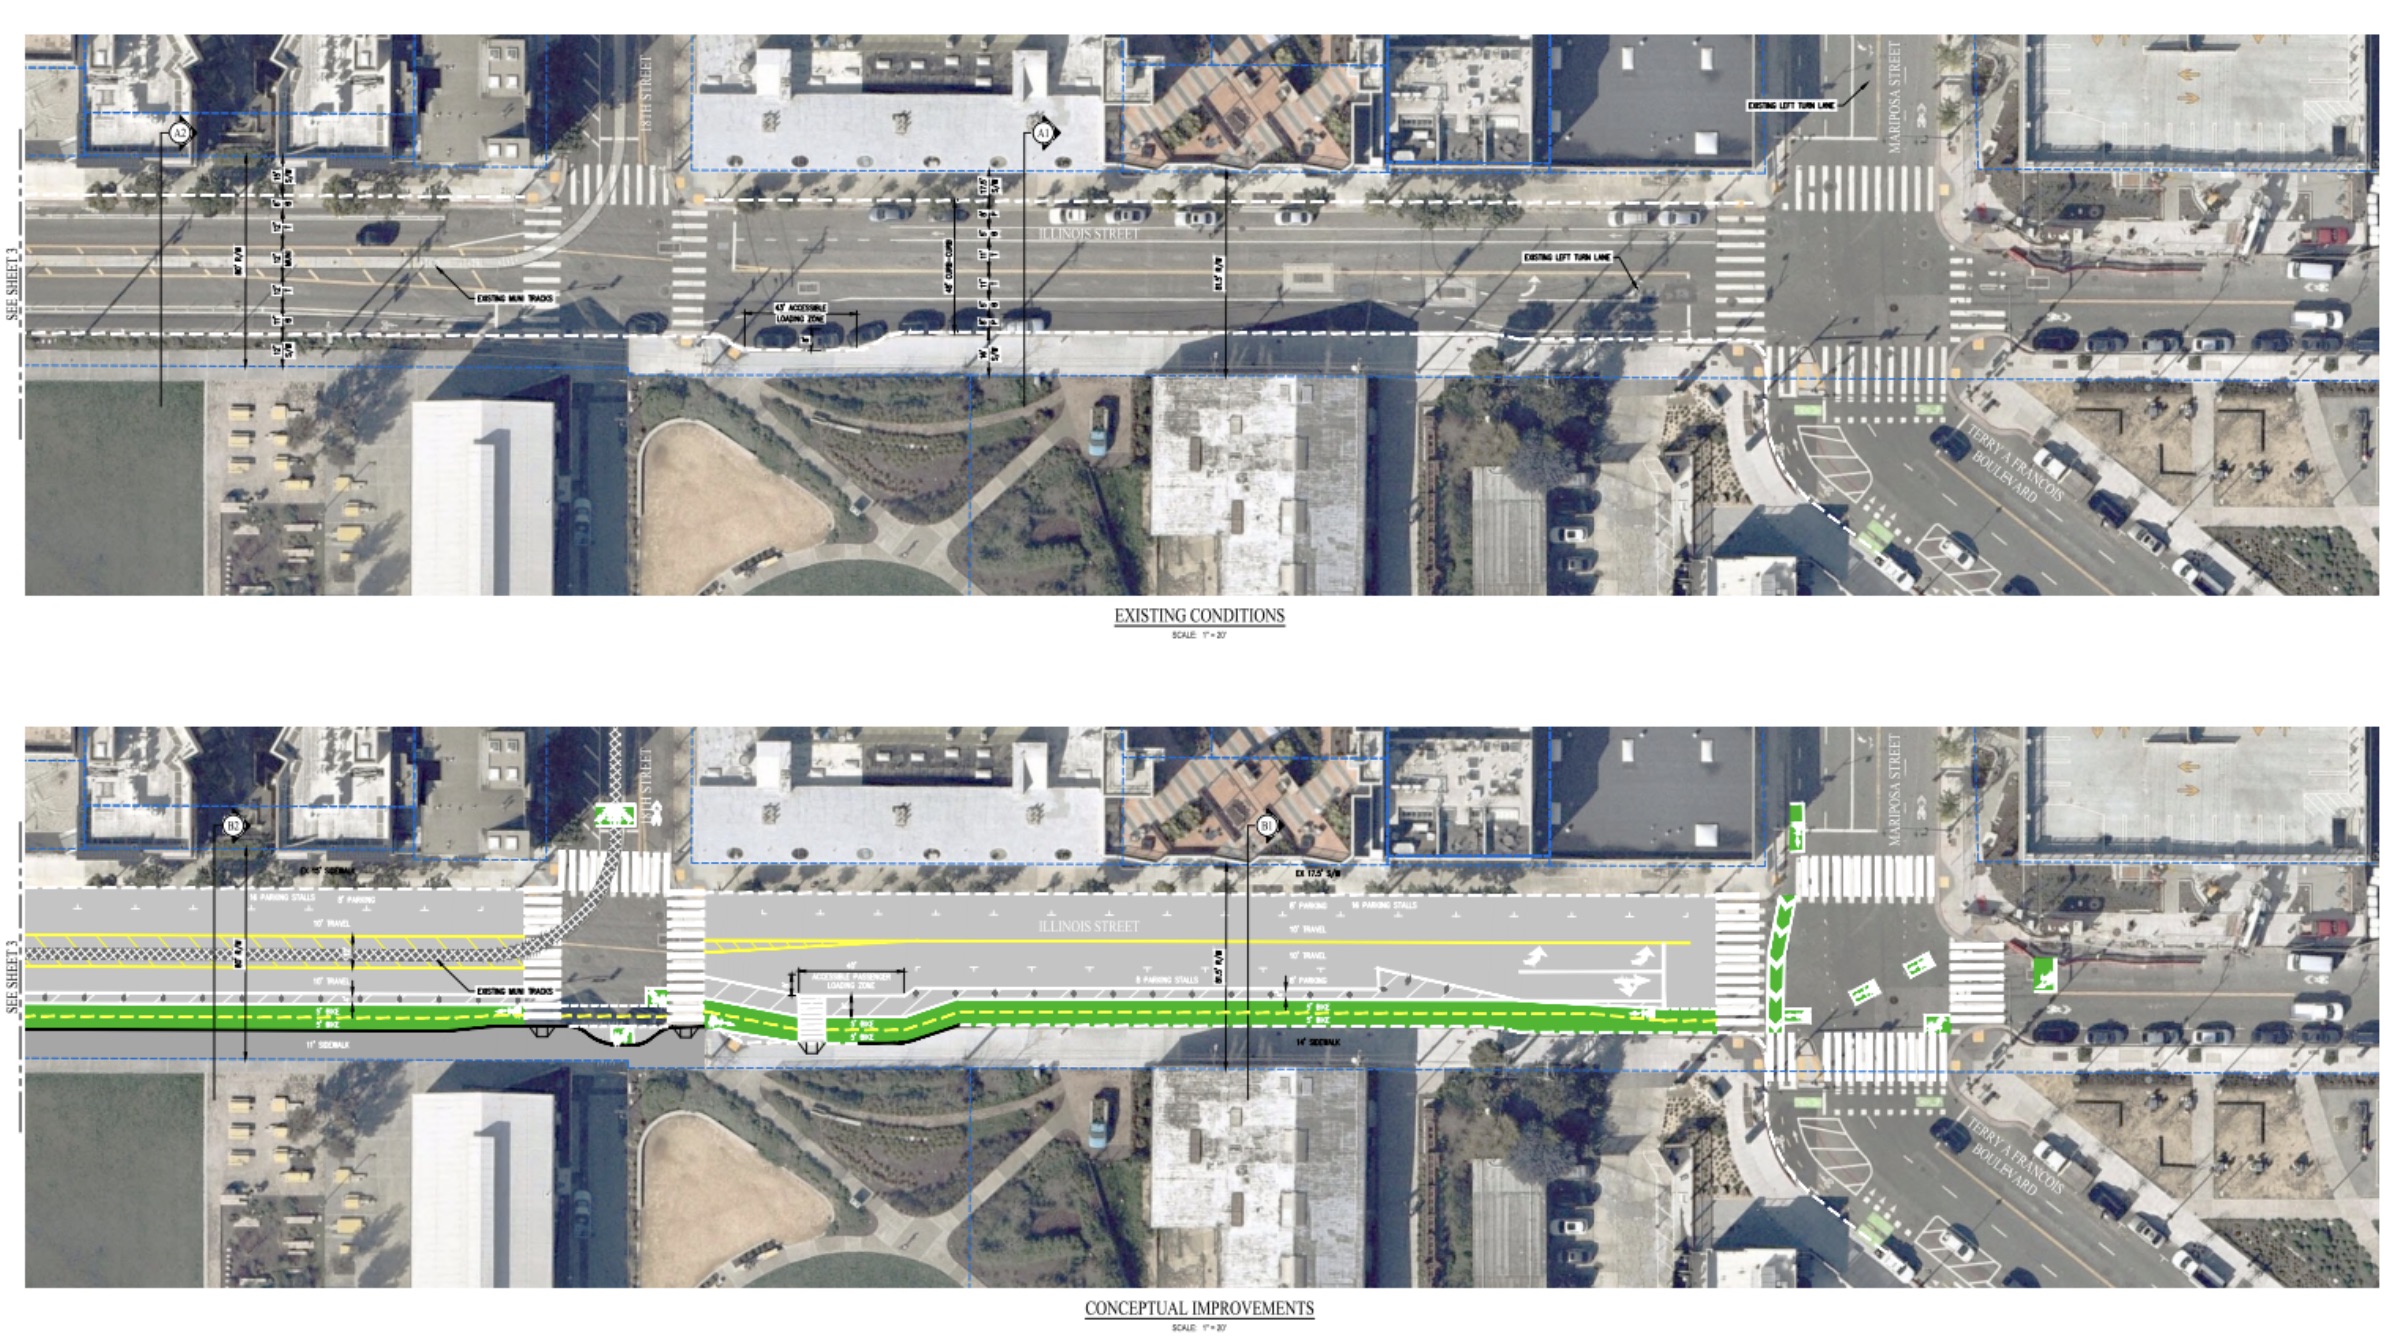 Current state with one unprotected lane per side compared to protected, seperated two-way cycle lane.